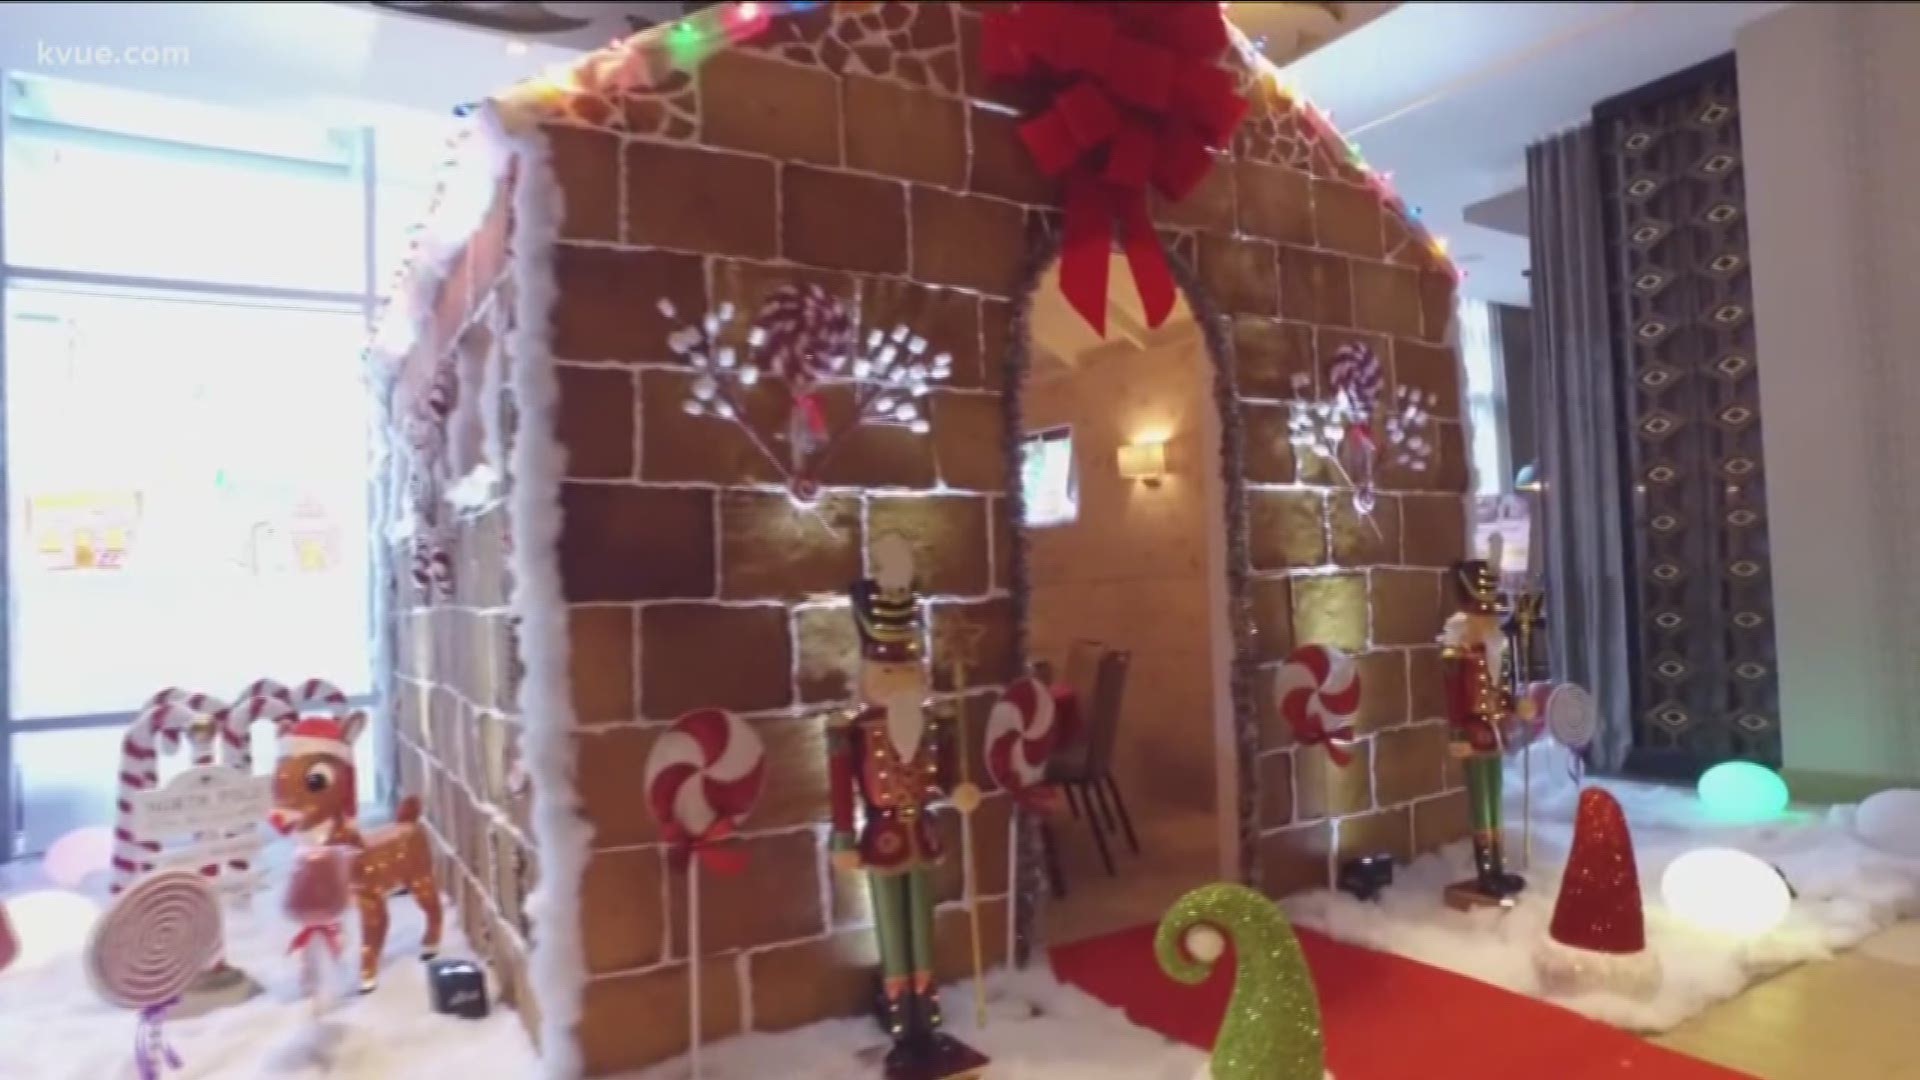 One hotel in Austin decided to take its gingerbread house one step further, proving everything really is bigger in Texas.